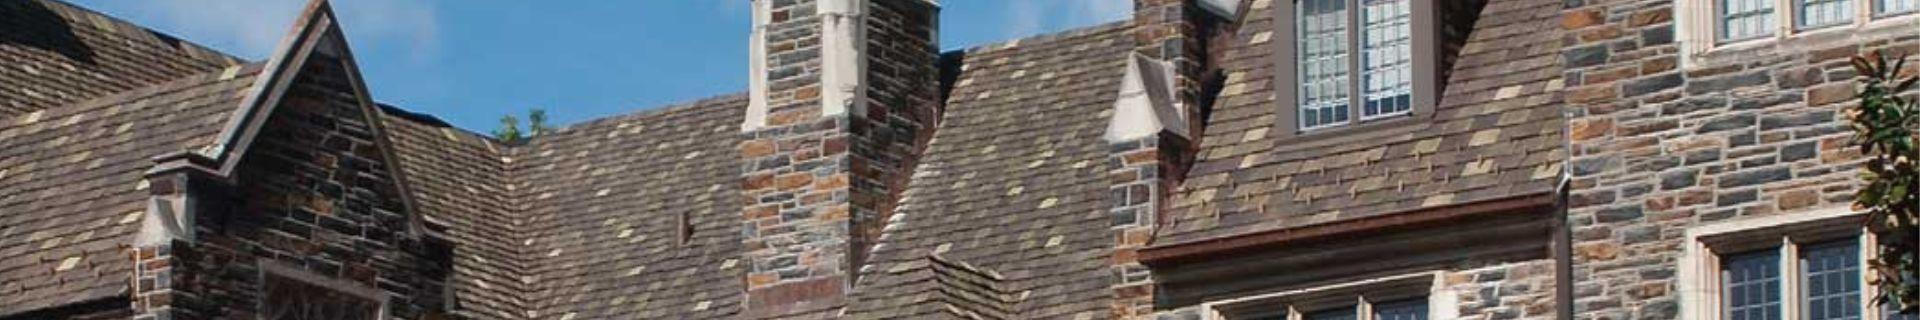 Ludowici Roofing Tile